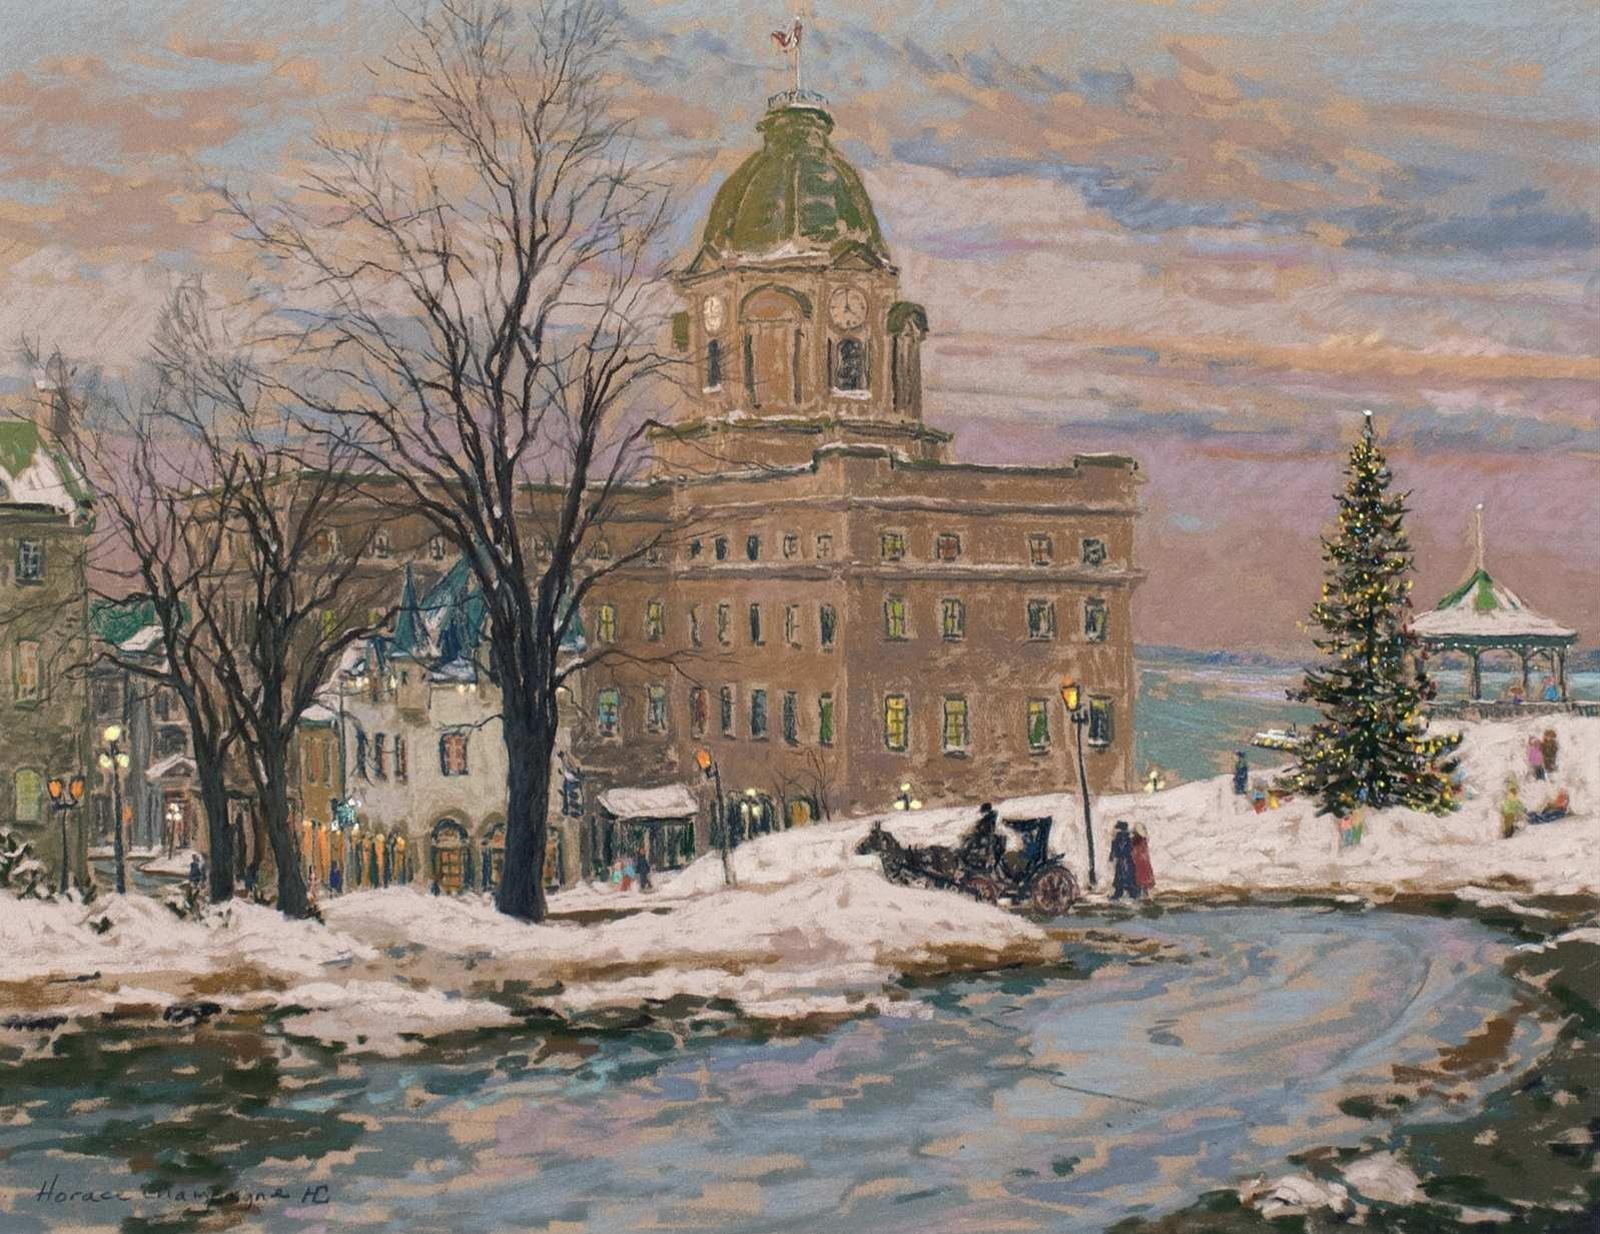 Horace Champagne (1937) - The Magic Of Christmastime In Old Quebec (Rue Ste-Anne, Old Quebec); 1993